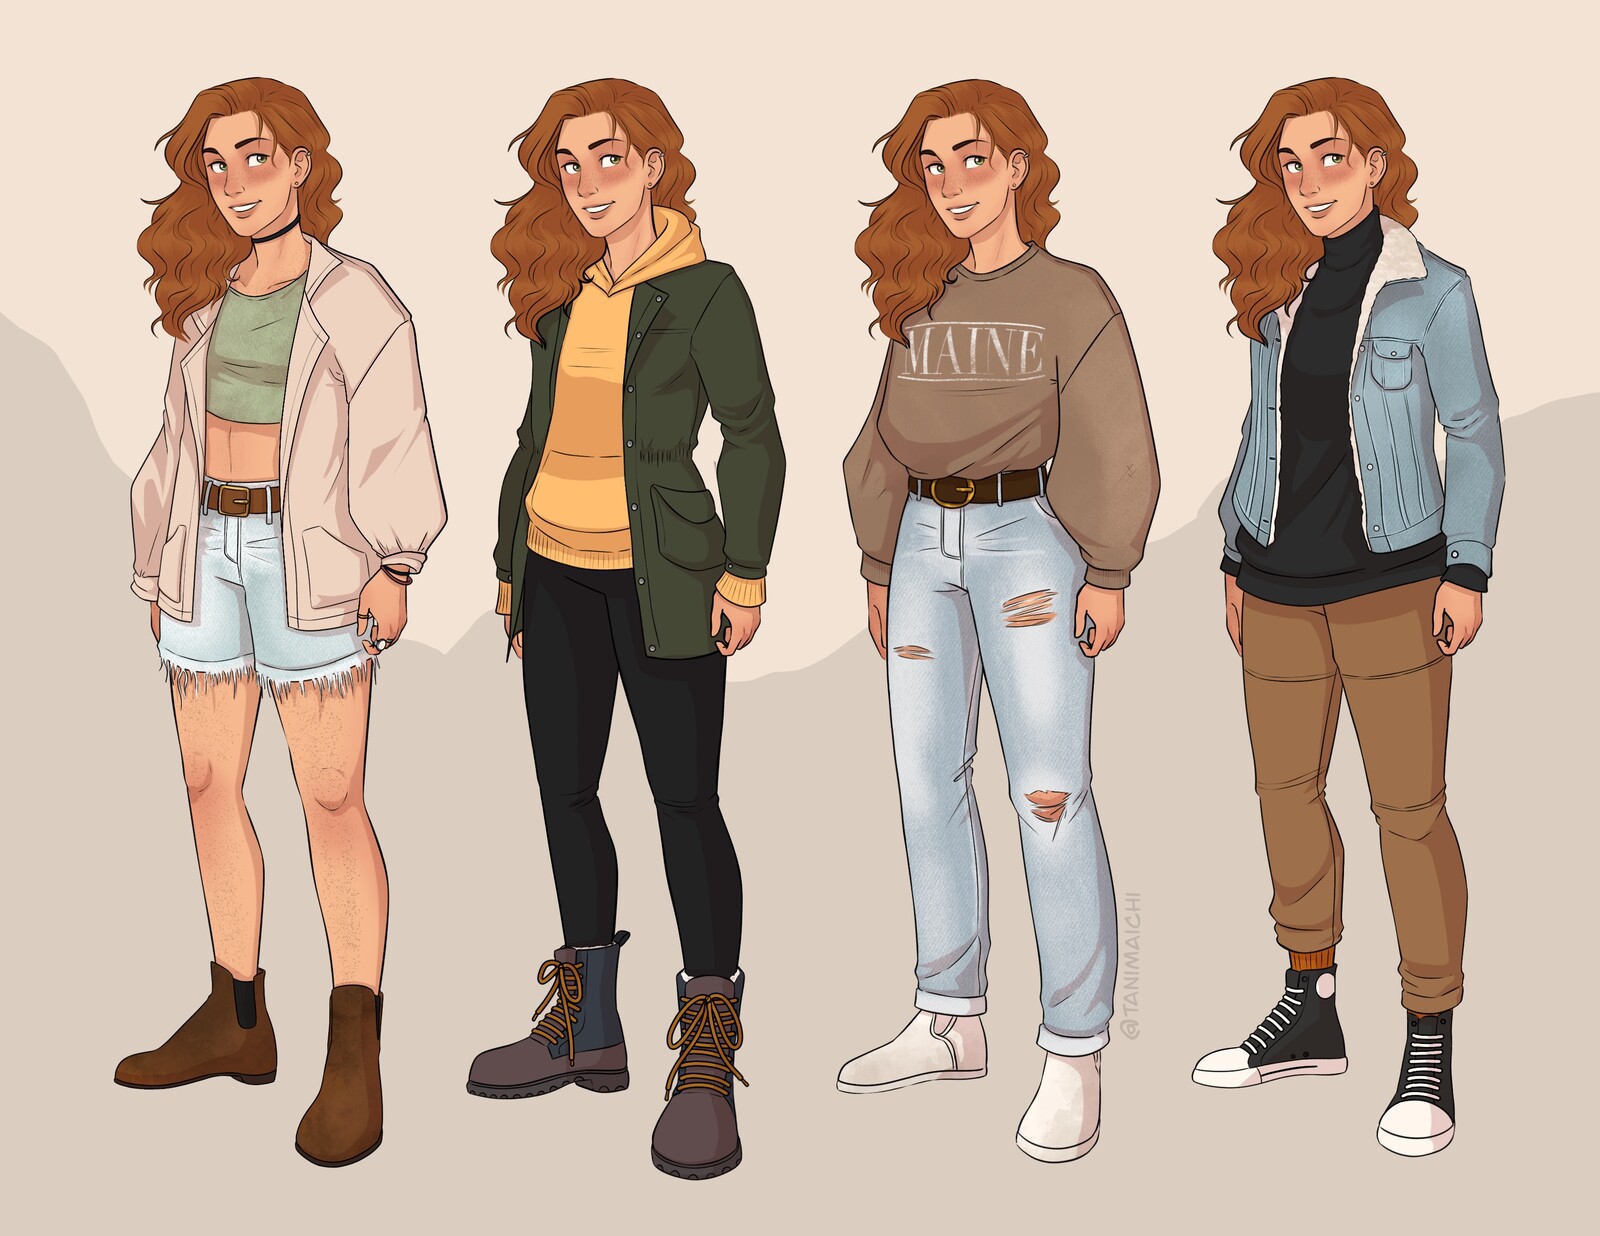 Hattie Fall Outfit Designs